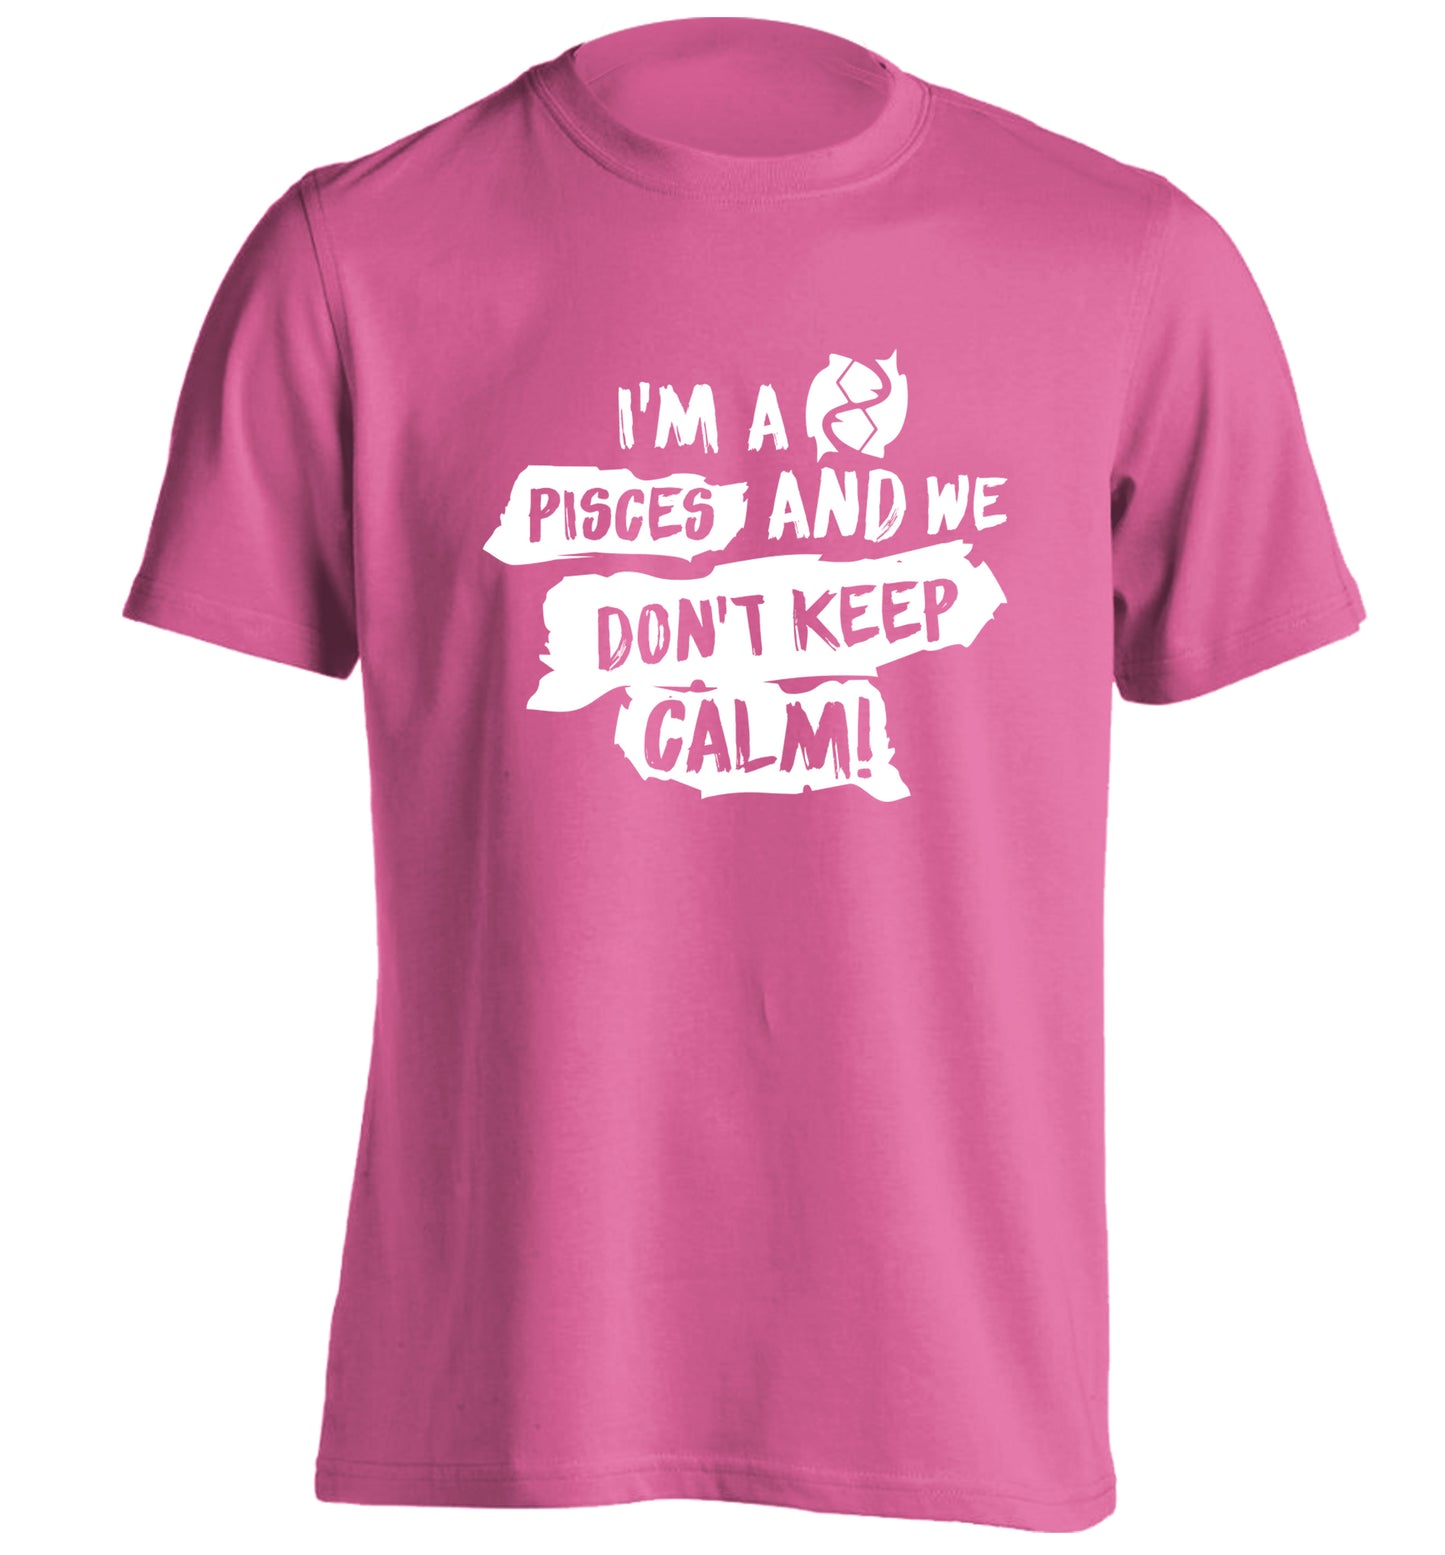 I'm a pisces and we don't keep calm adults unisex pink Tshirt 2XL